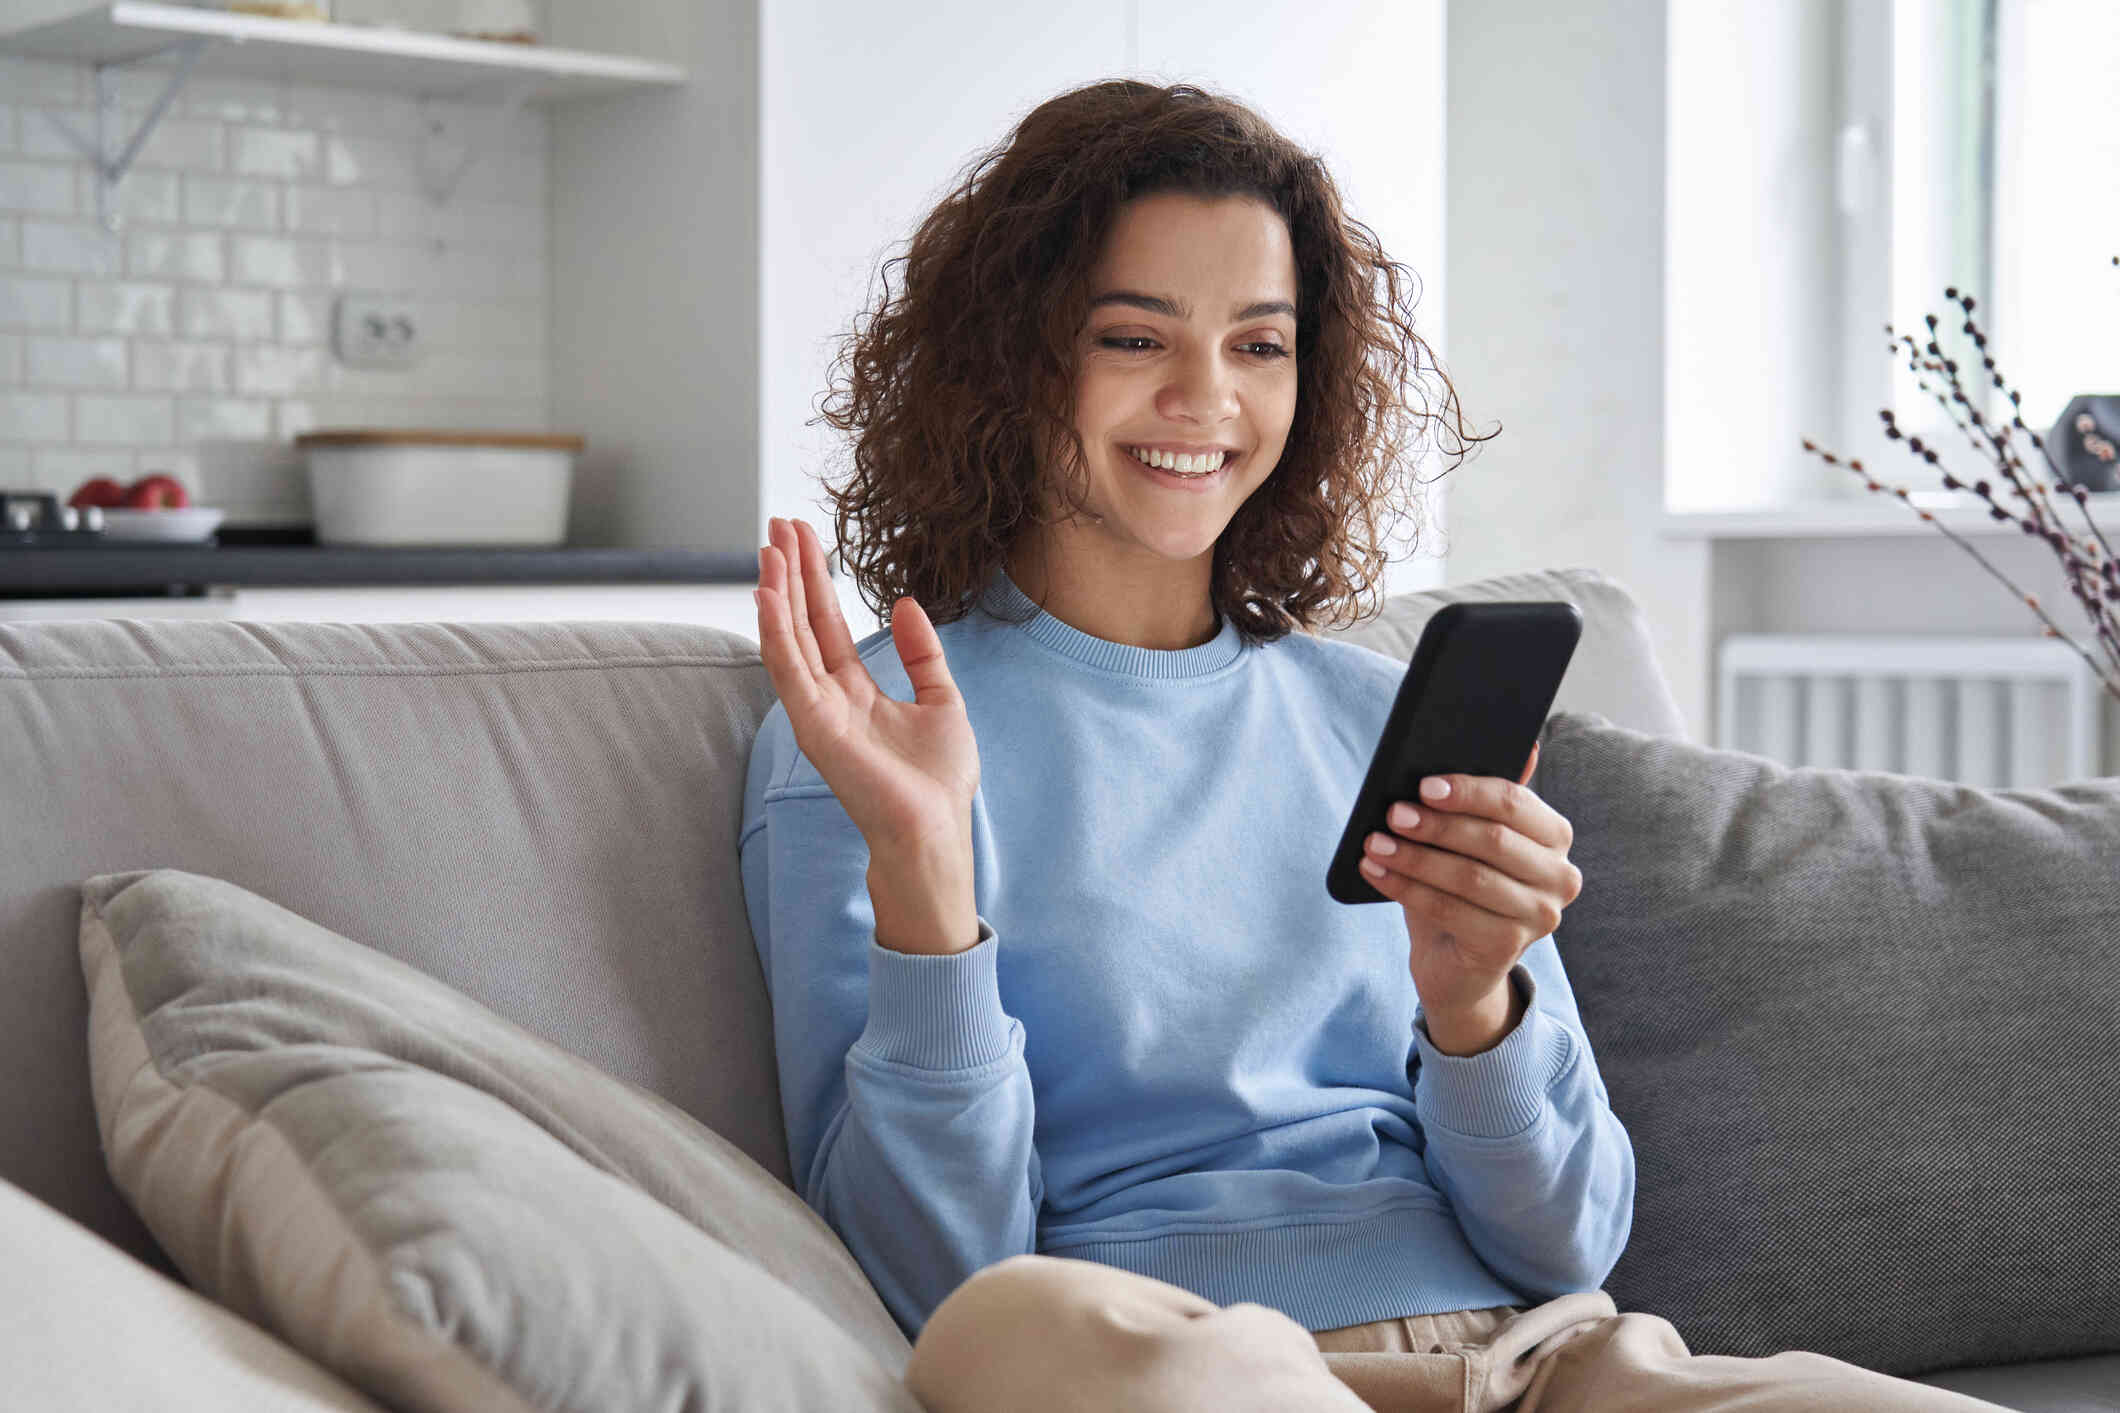 A girl in a blue sweater sits on the couch and waves while smiling at at the cellphone in her hand during a video call.